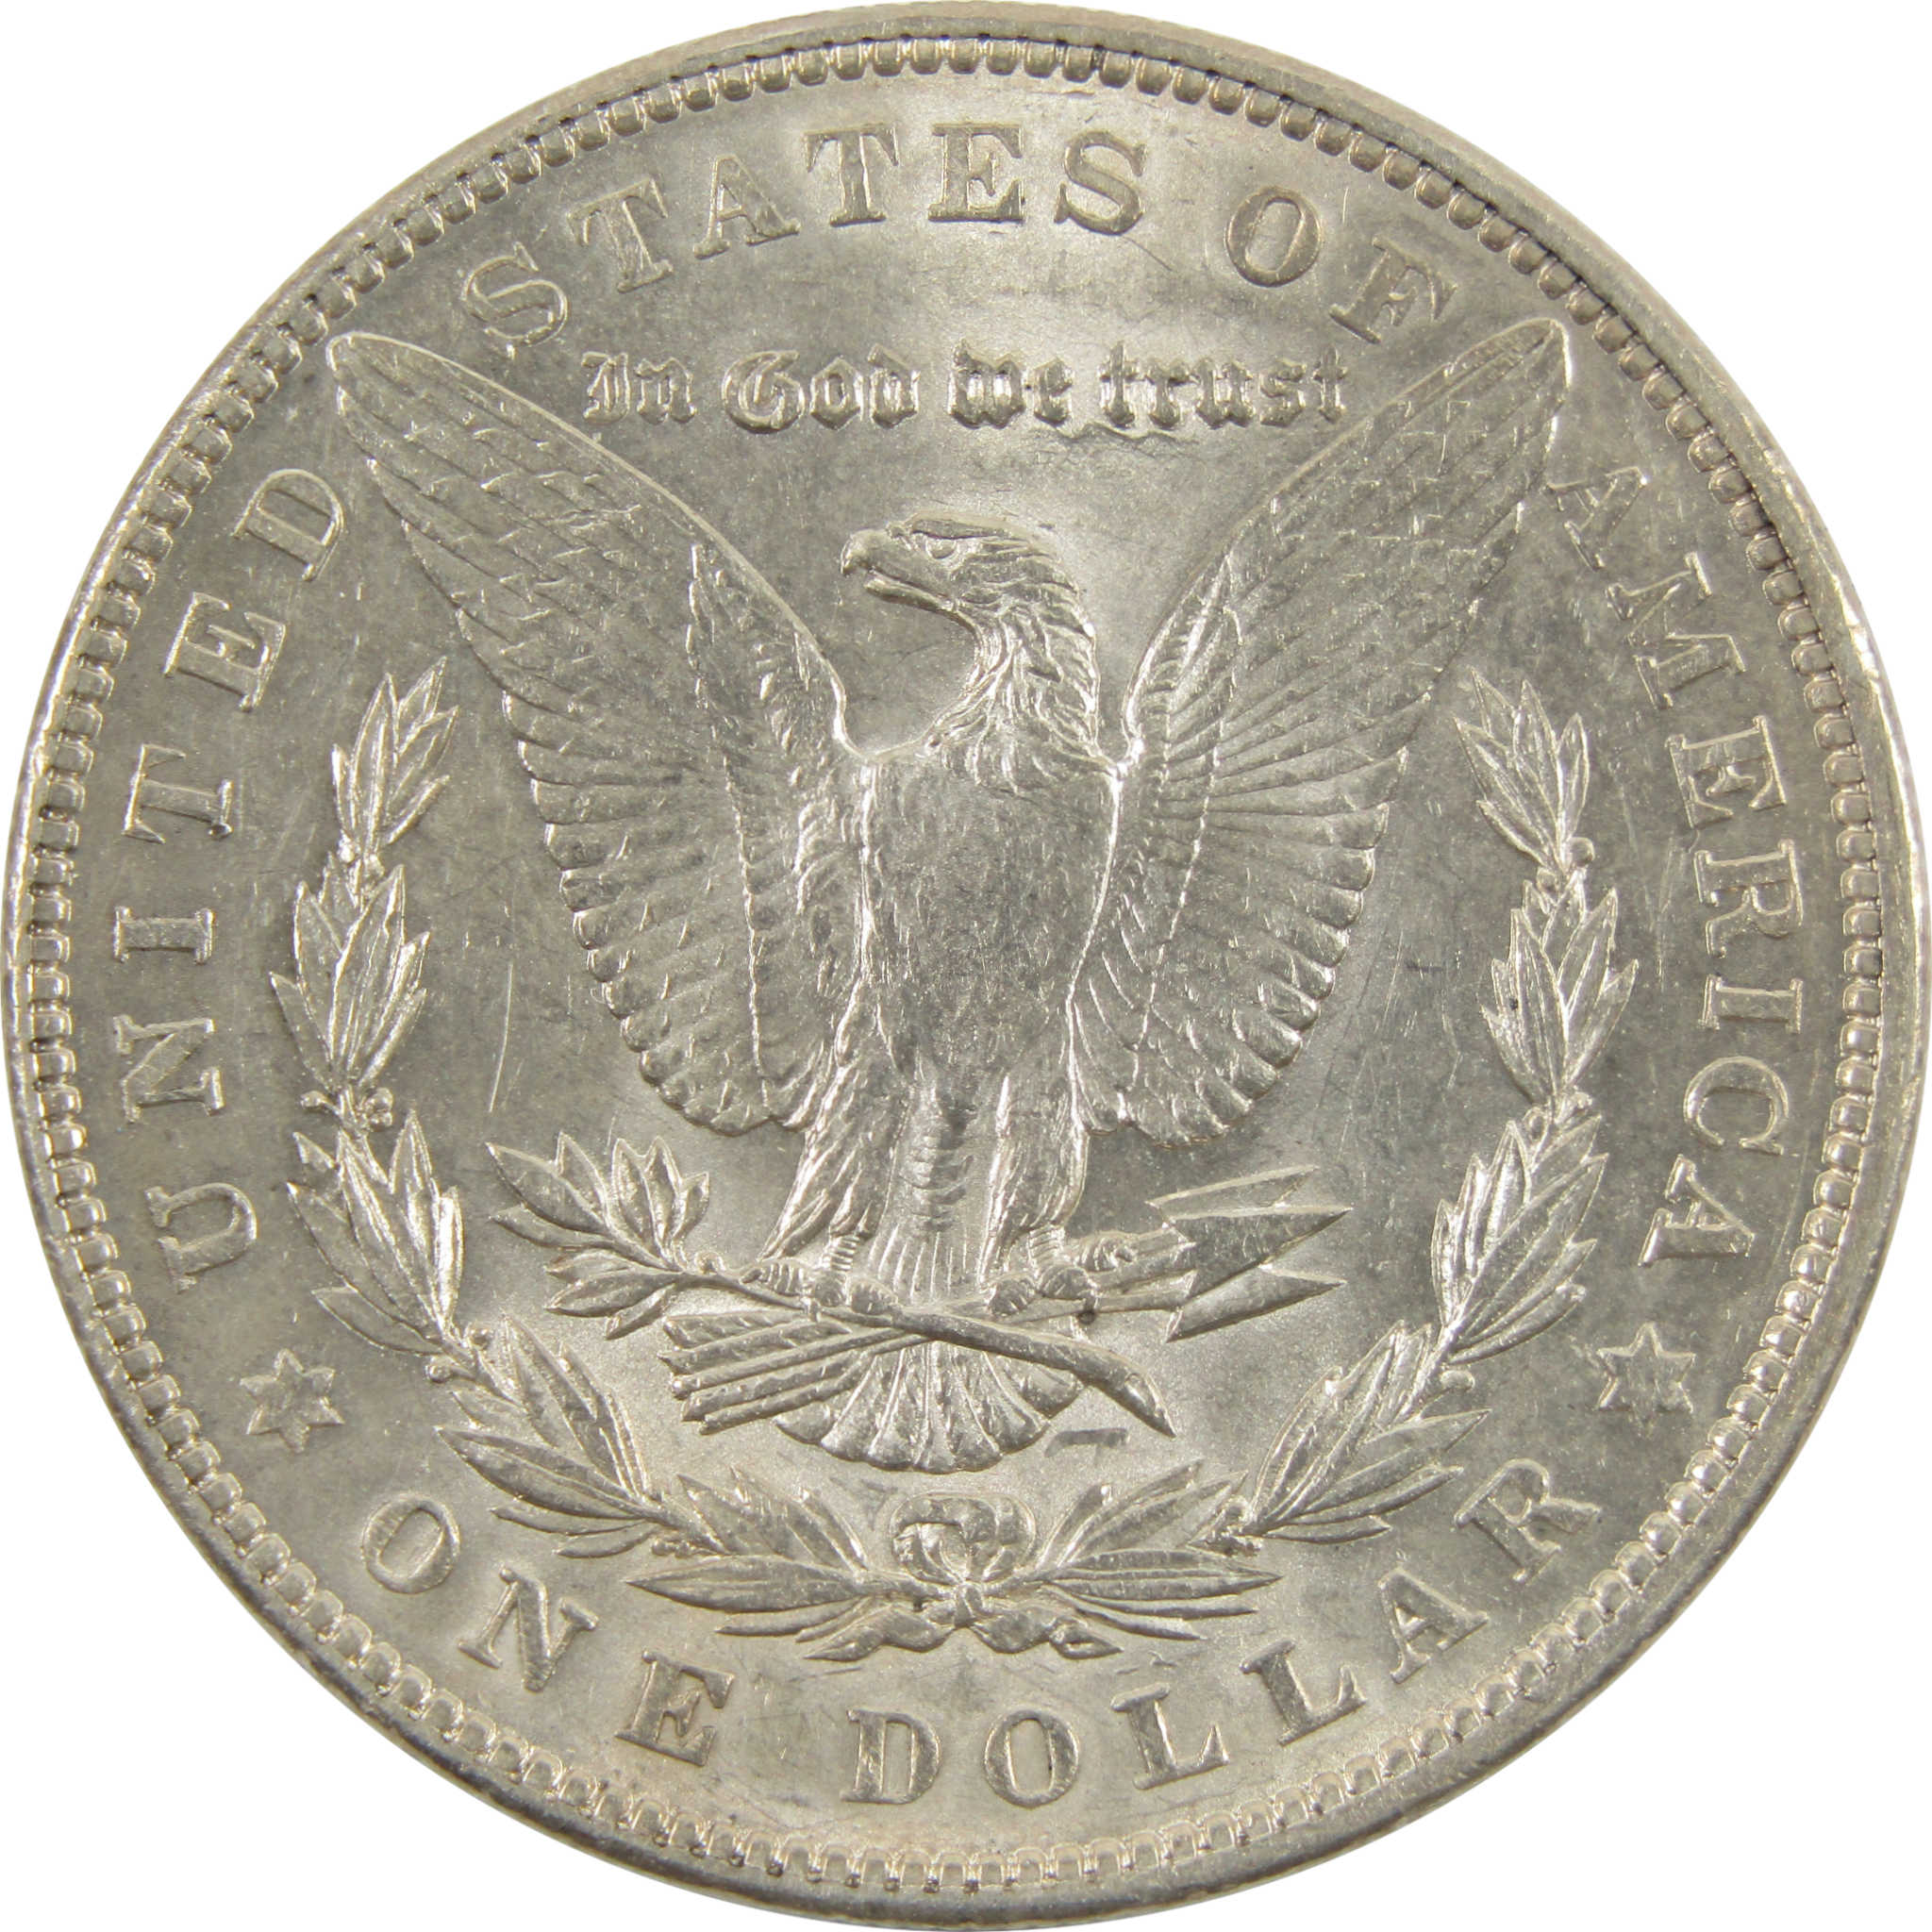 1902 Morgan Dollar XF EF Extremely Fine 90% Silver $1 Coin SKU:I11211 - Morgan coin - Morgan silver dollar - Morgan silver dollar for sale - Profile Coins &amp; Collectibles